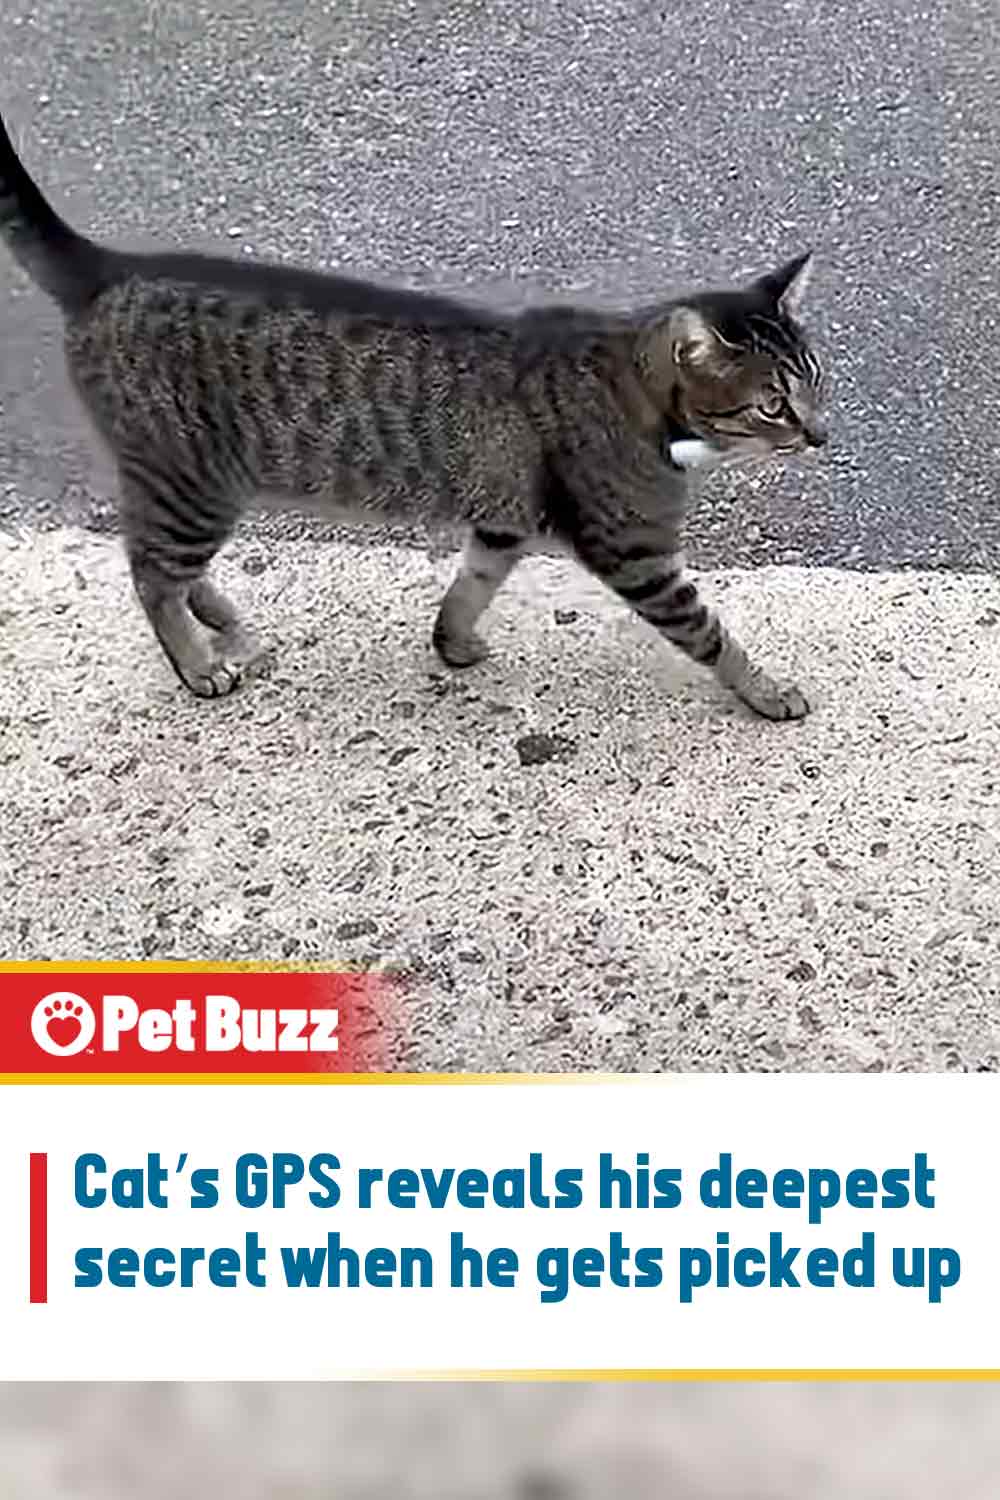 Cat’s GPS reveals his deepest secret when he gets picked up